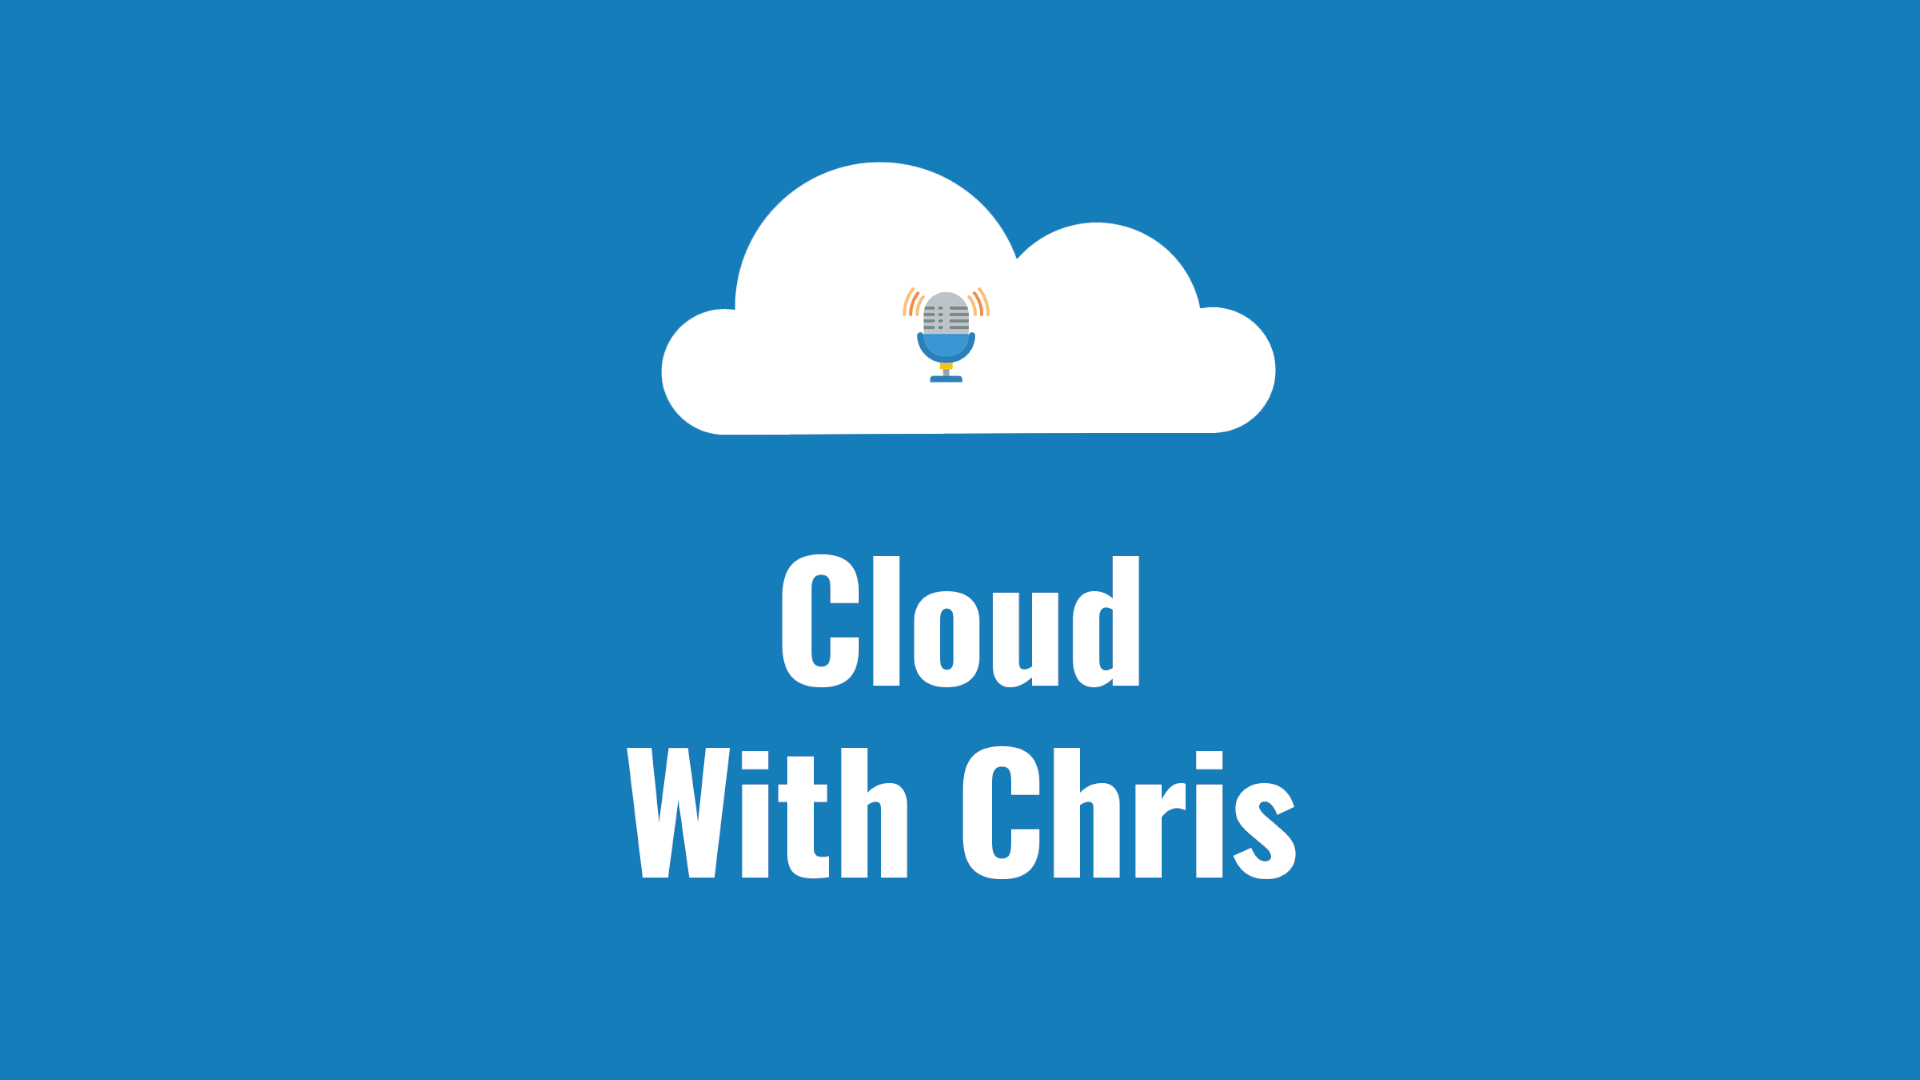 Making cloudwithchris.com more accessible